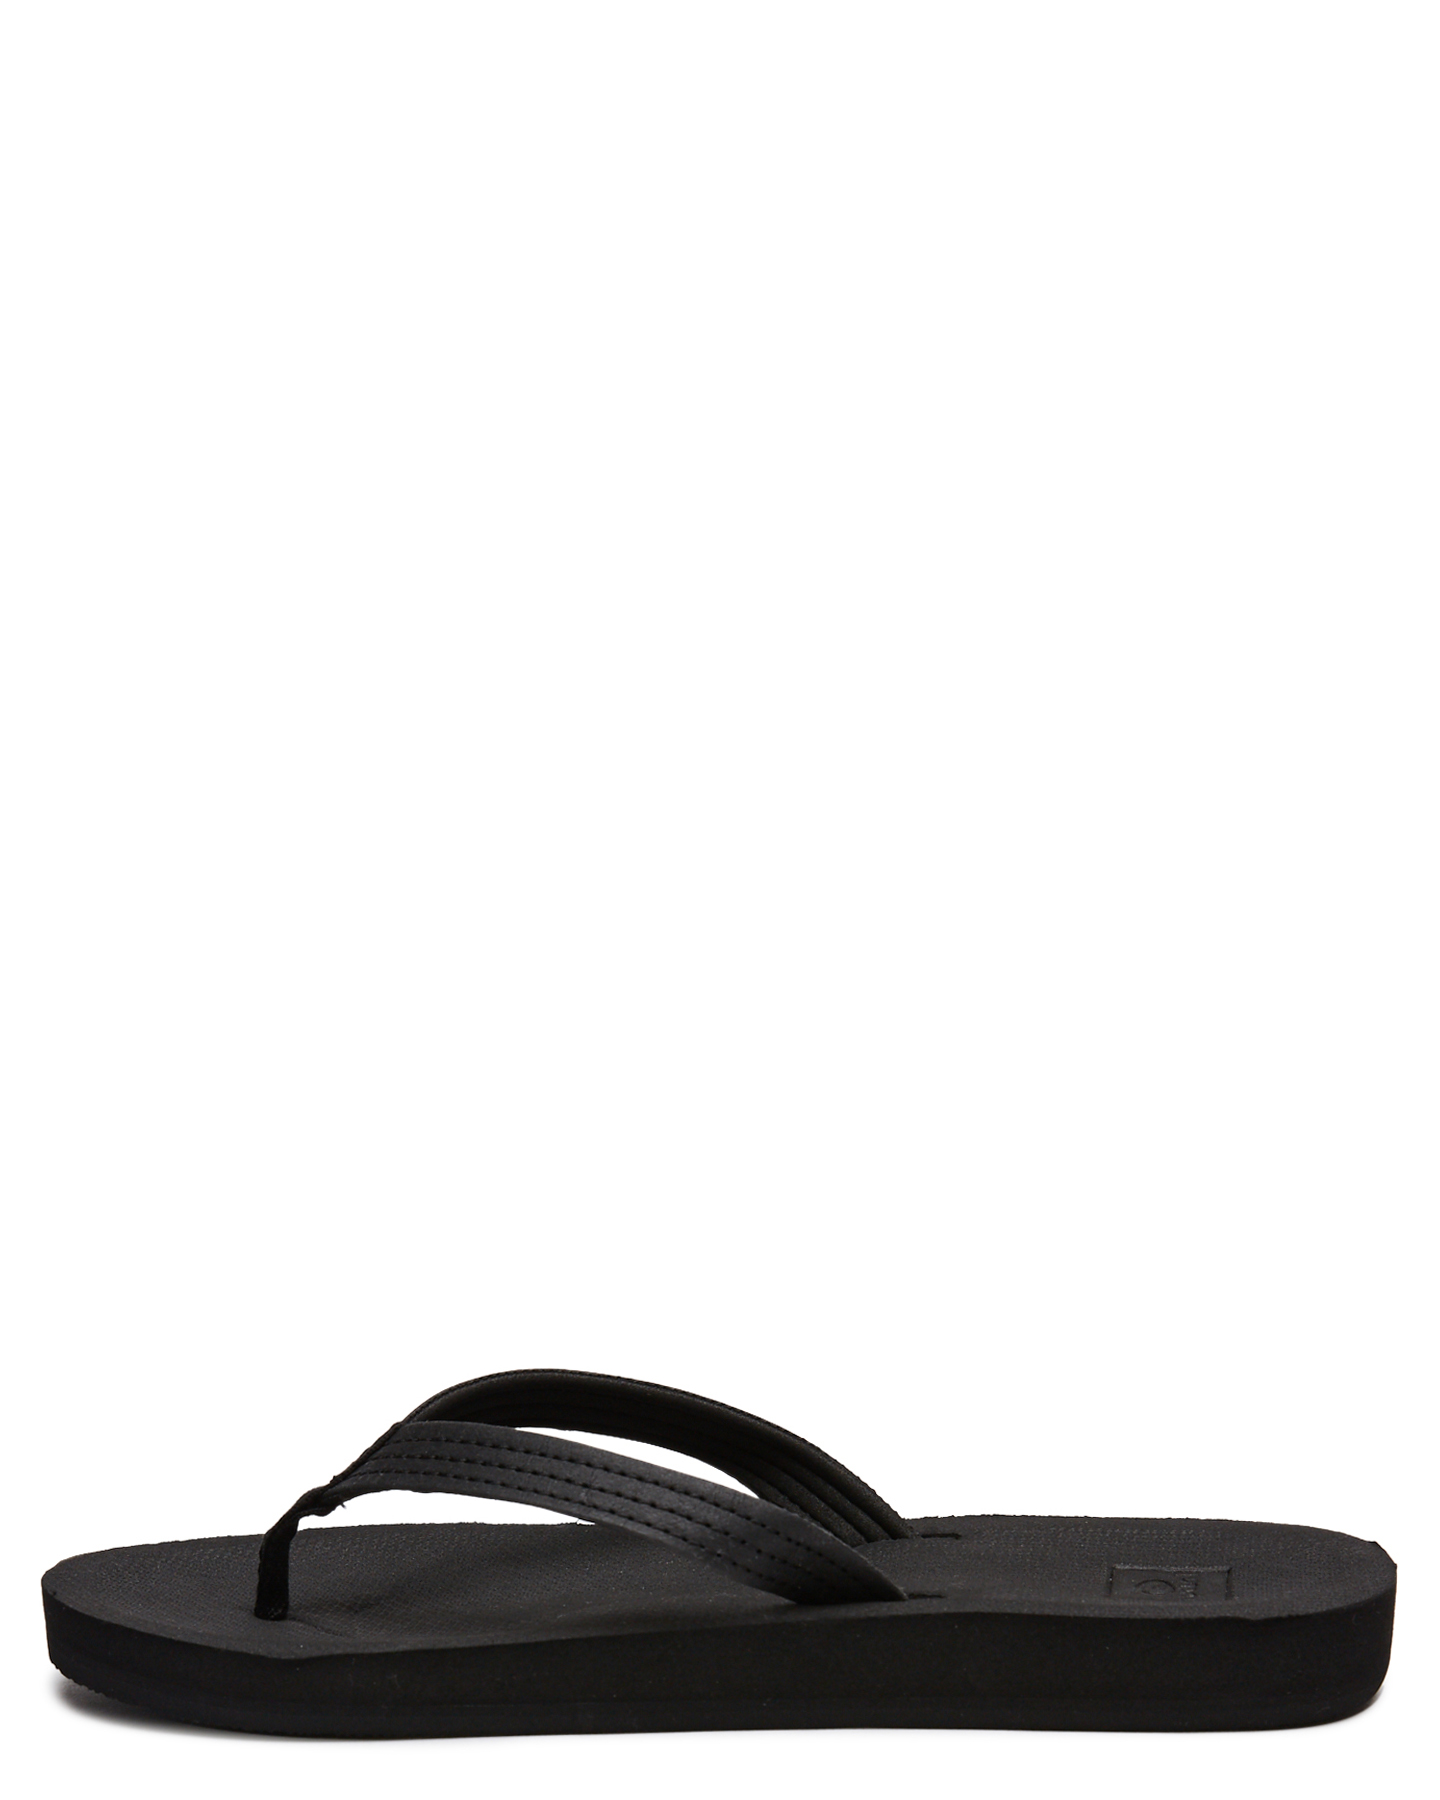 Rip Curl Womens Southside Eco Thong - Black | SurfStitch